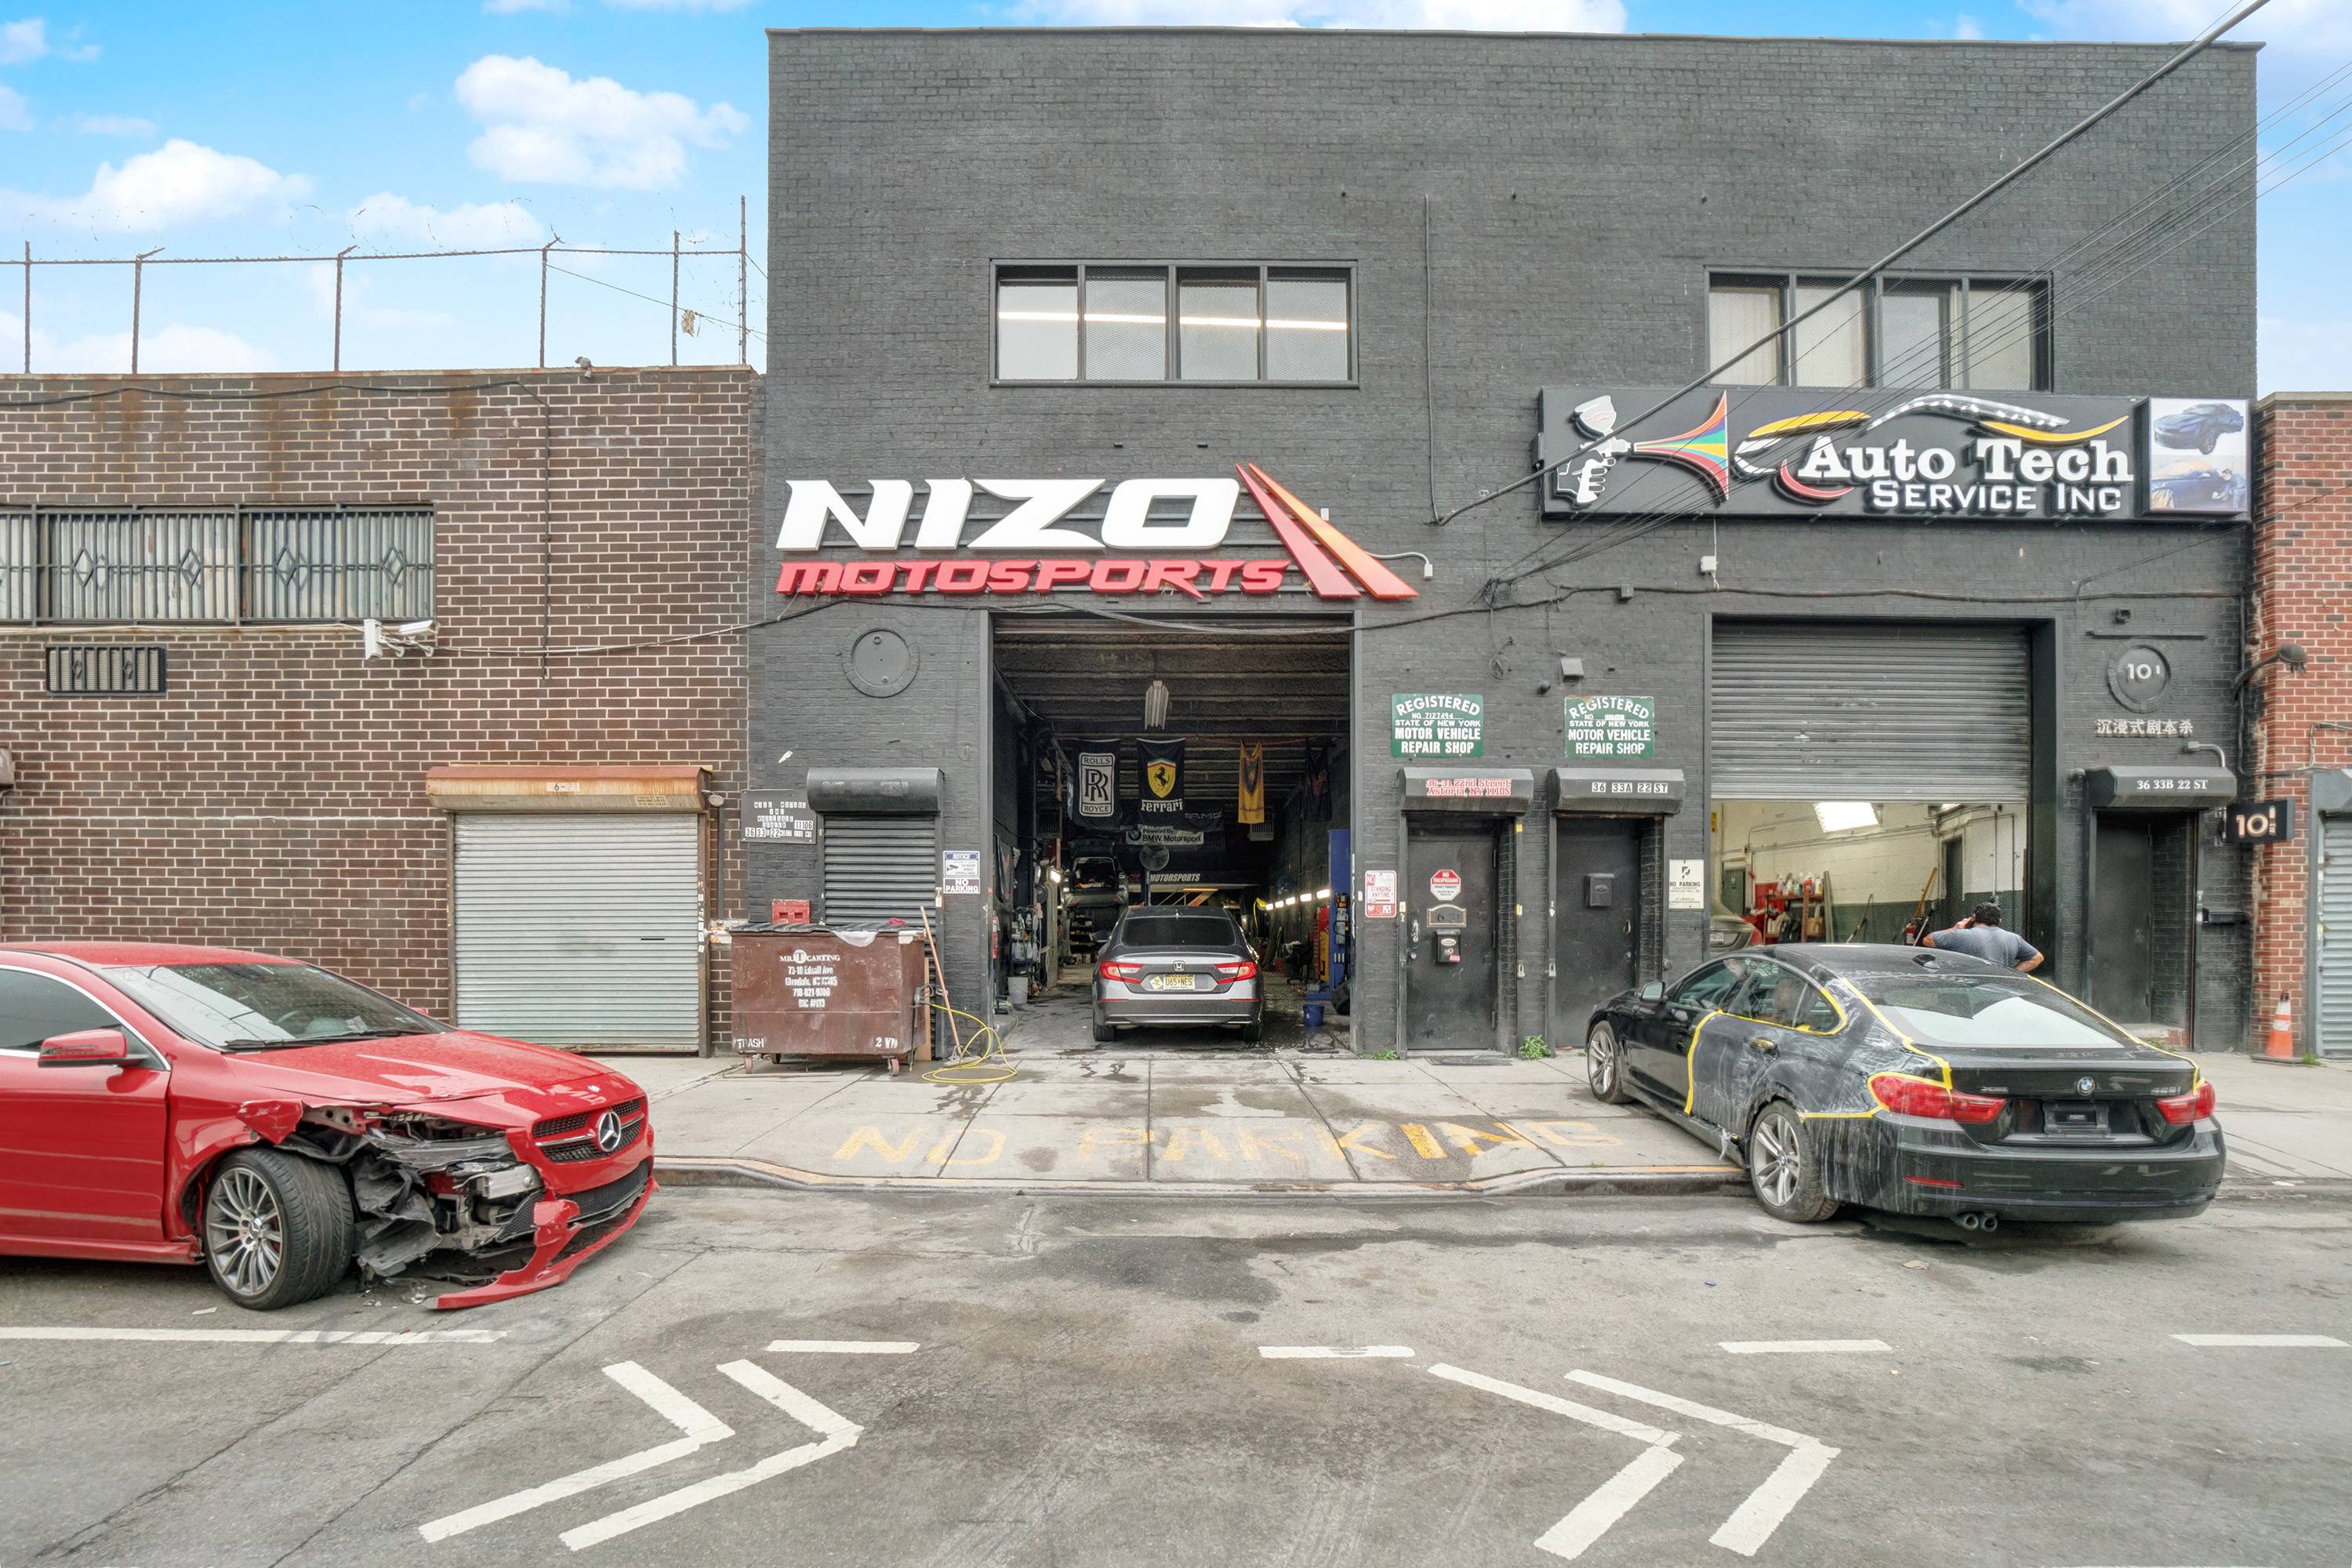 Long Island City: Auto Body/Auto Repair Business For Sale - Fully Built Out